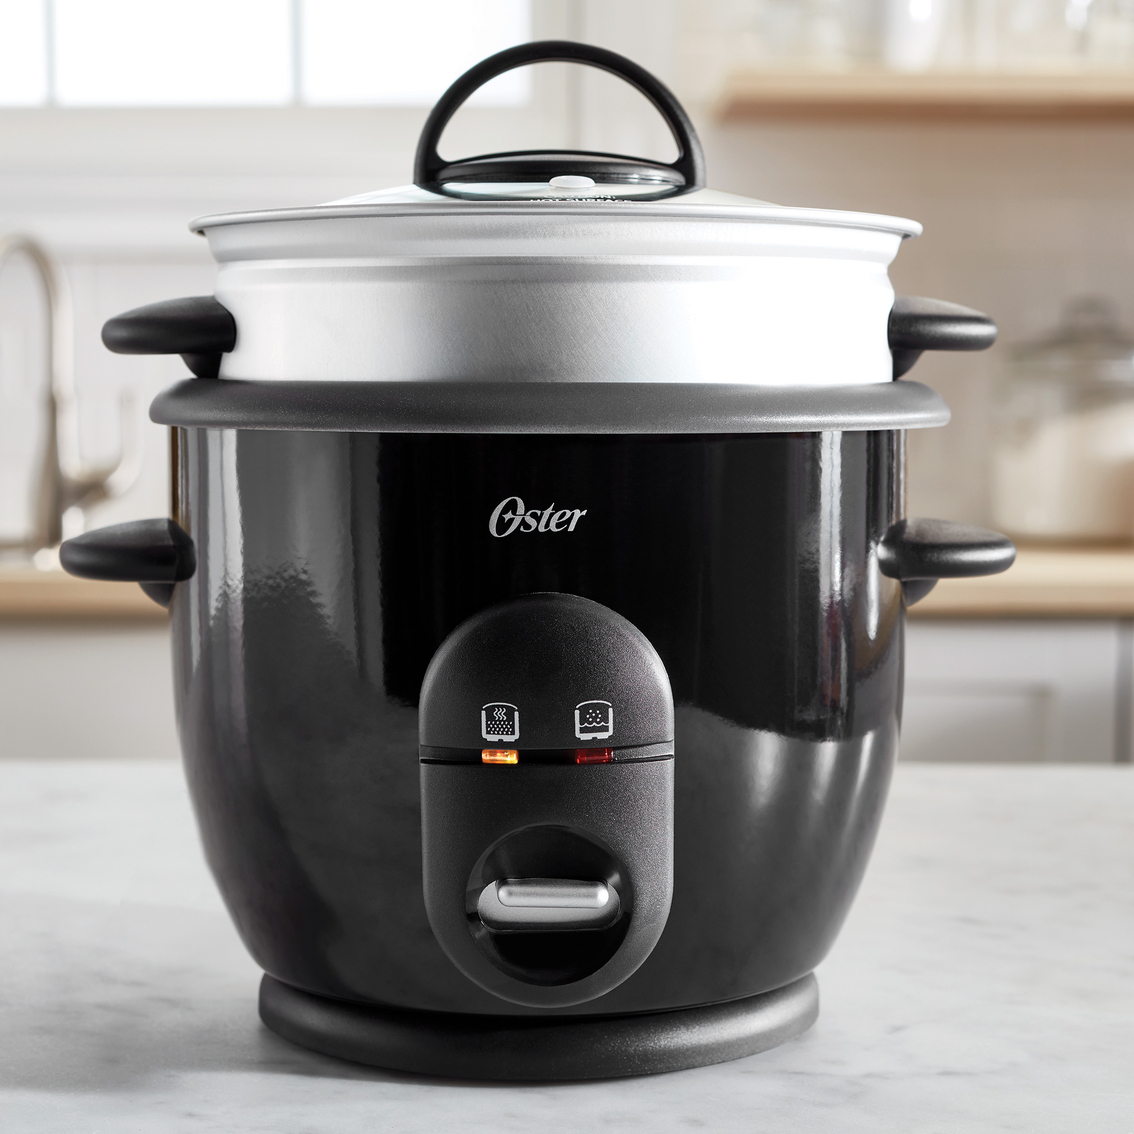 Oster Diamondforce Nonstick 6 Cup Electric Rice Cooker, Cookers & Steamers, Furniture & Appliances